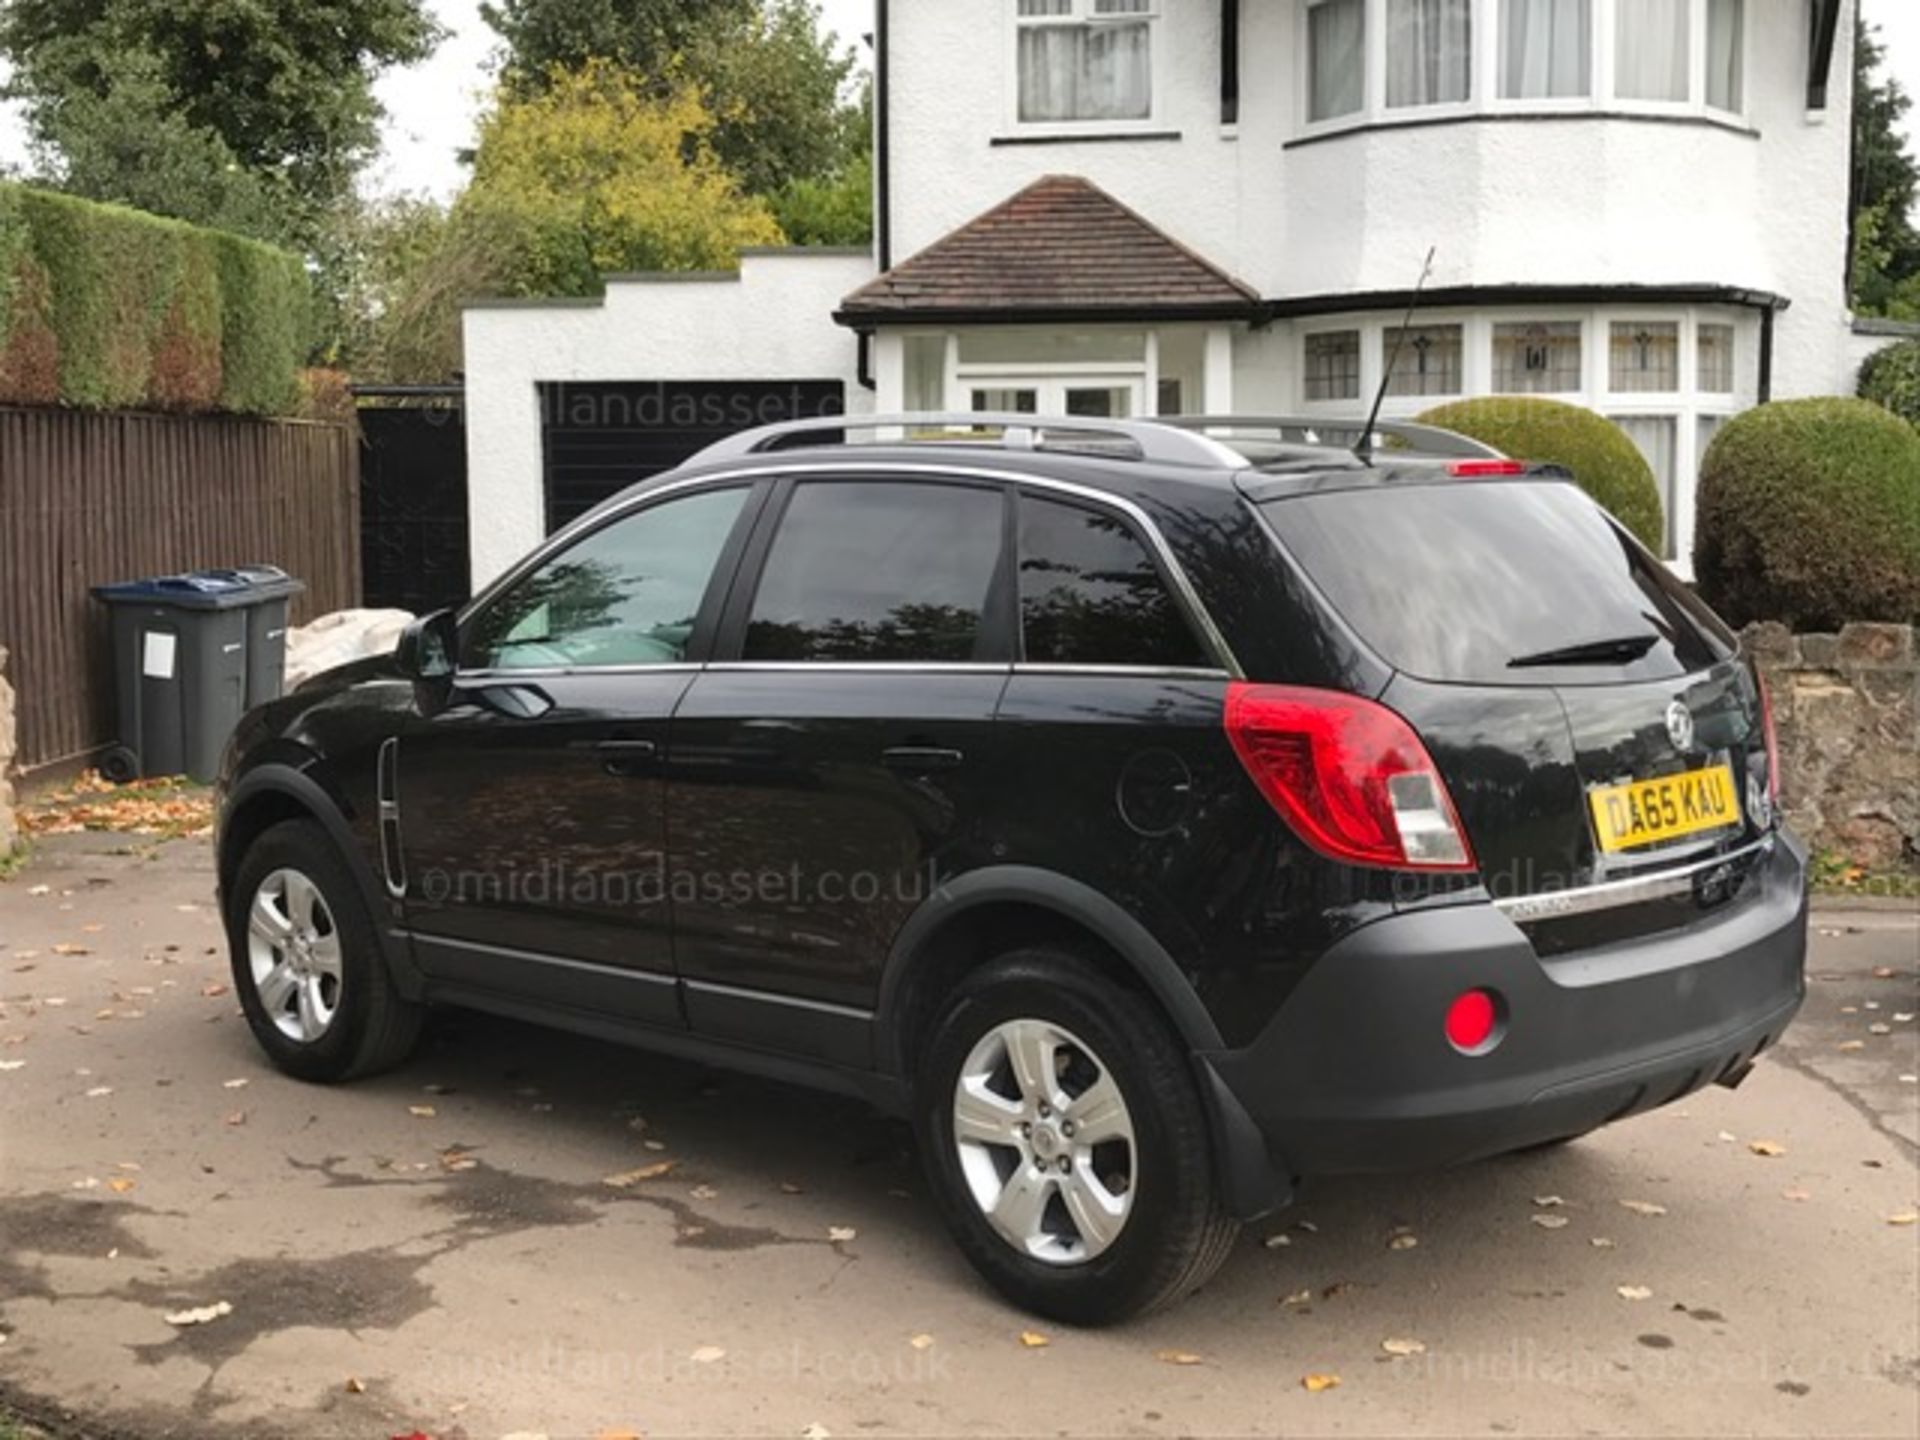 2015/15 REG VAUXHALL ANTARA EXCLUSIVE 2.2 CDTI ONE FORMER KEEPER FULL SERVICE HISTORY - Image 6 of 9